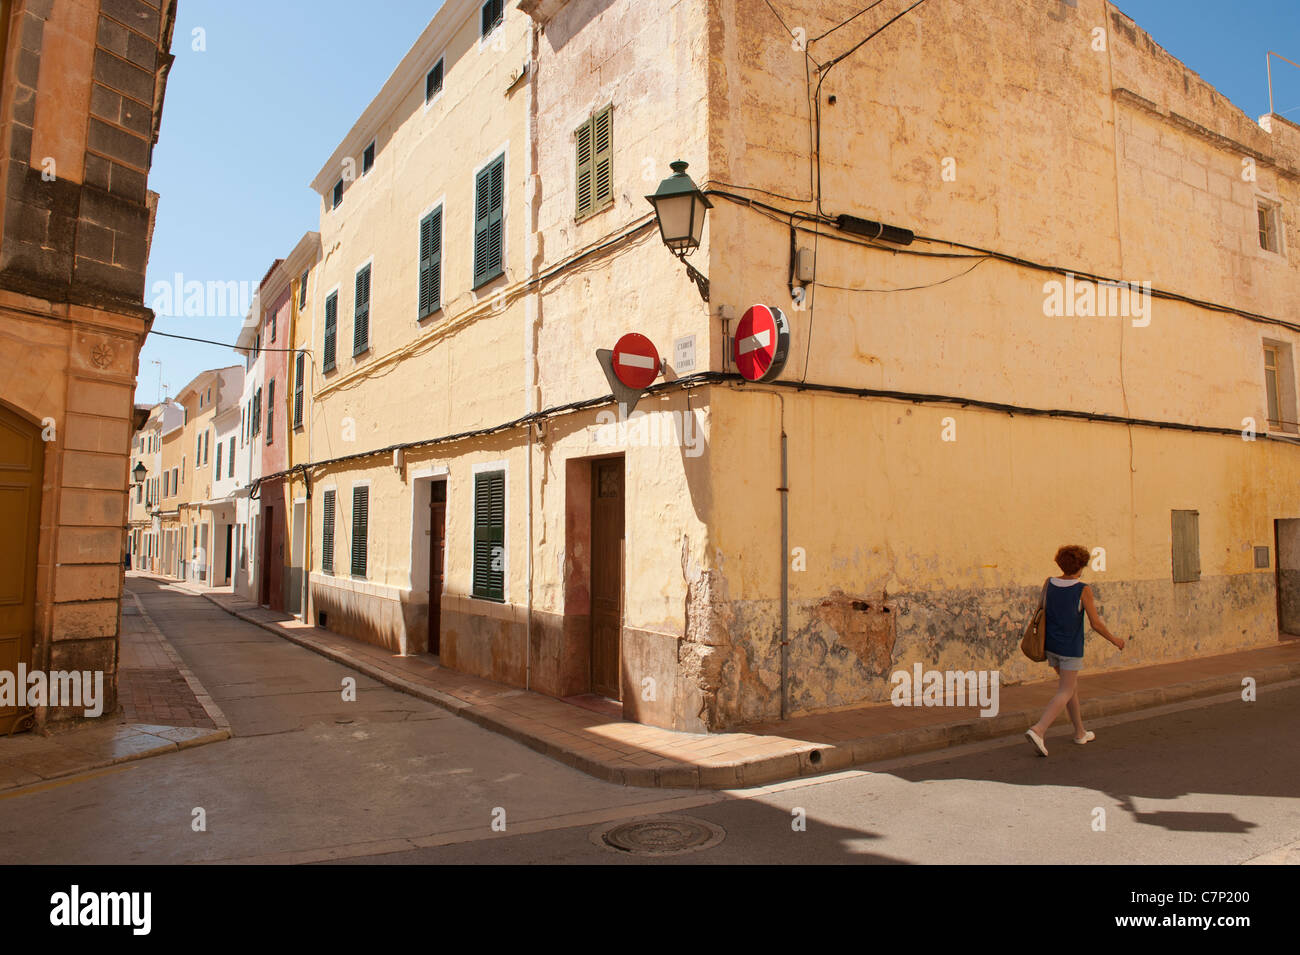 Alley in Minorca Spain, bright coloured building line a street with a woman walking. Stock Photo